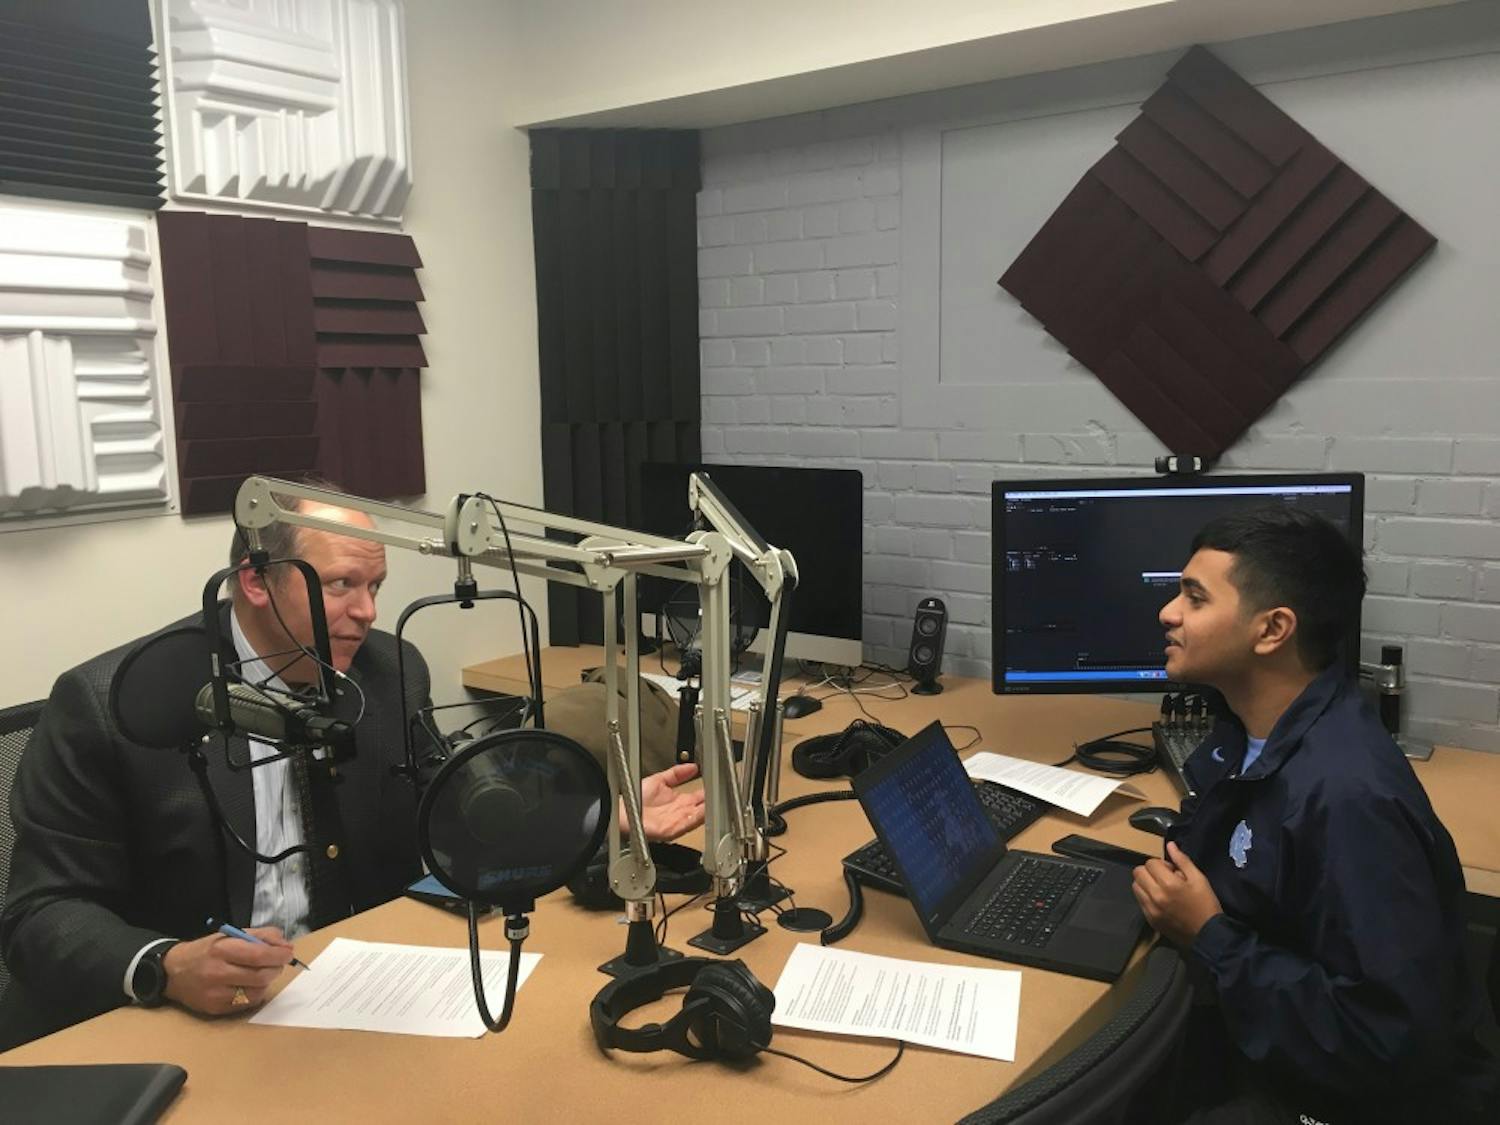 UNC alumni Akib Khan, and Ted Zoller, PhD, Director of the Entrepreneurship Center and T.W. Lewis Distinguished Clinical Professor of Strategy and Entrepreneurship, creating the On the Heels of Innovation podcast. Photo courtesy of Aspyn Fulcher. 

